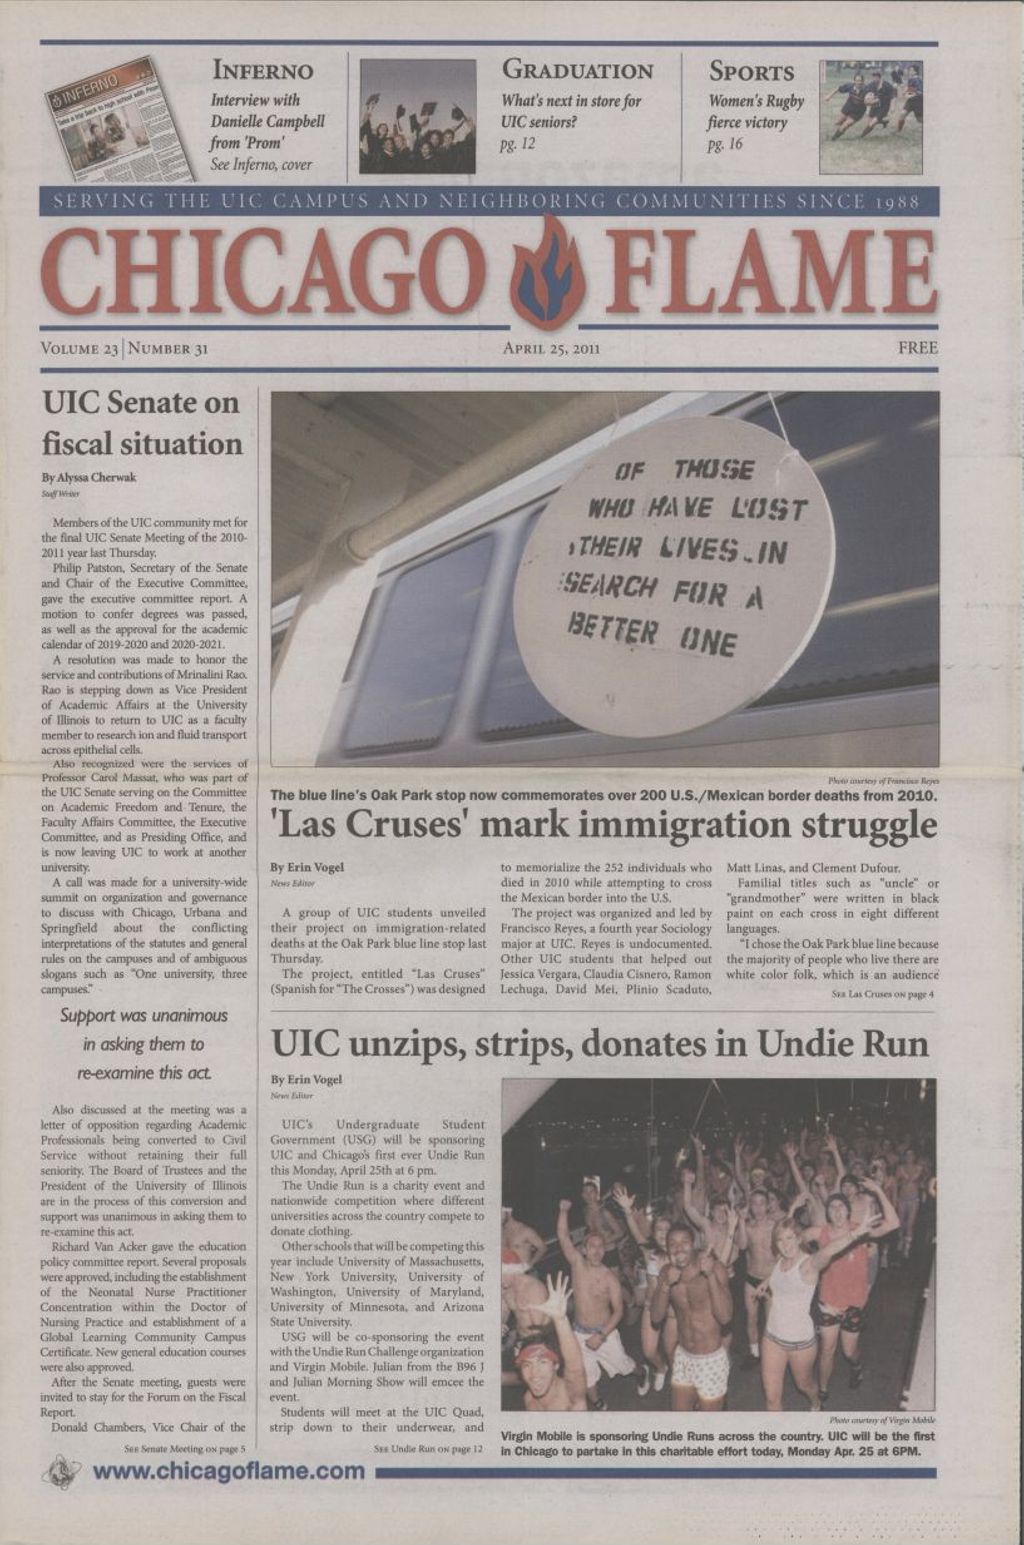 Chicago Flame (April 25, 2011)